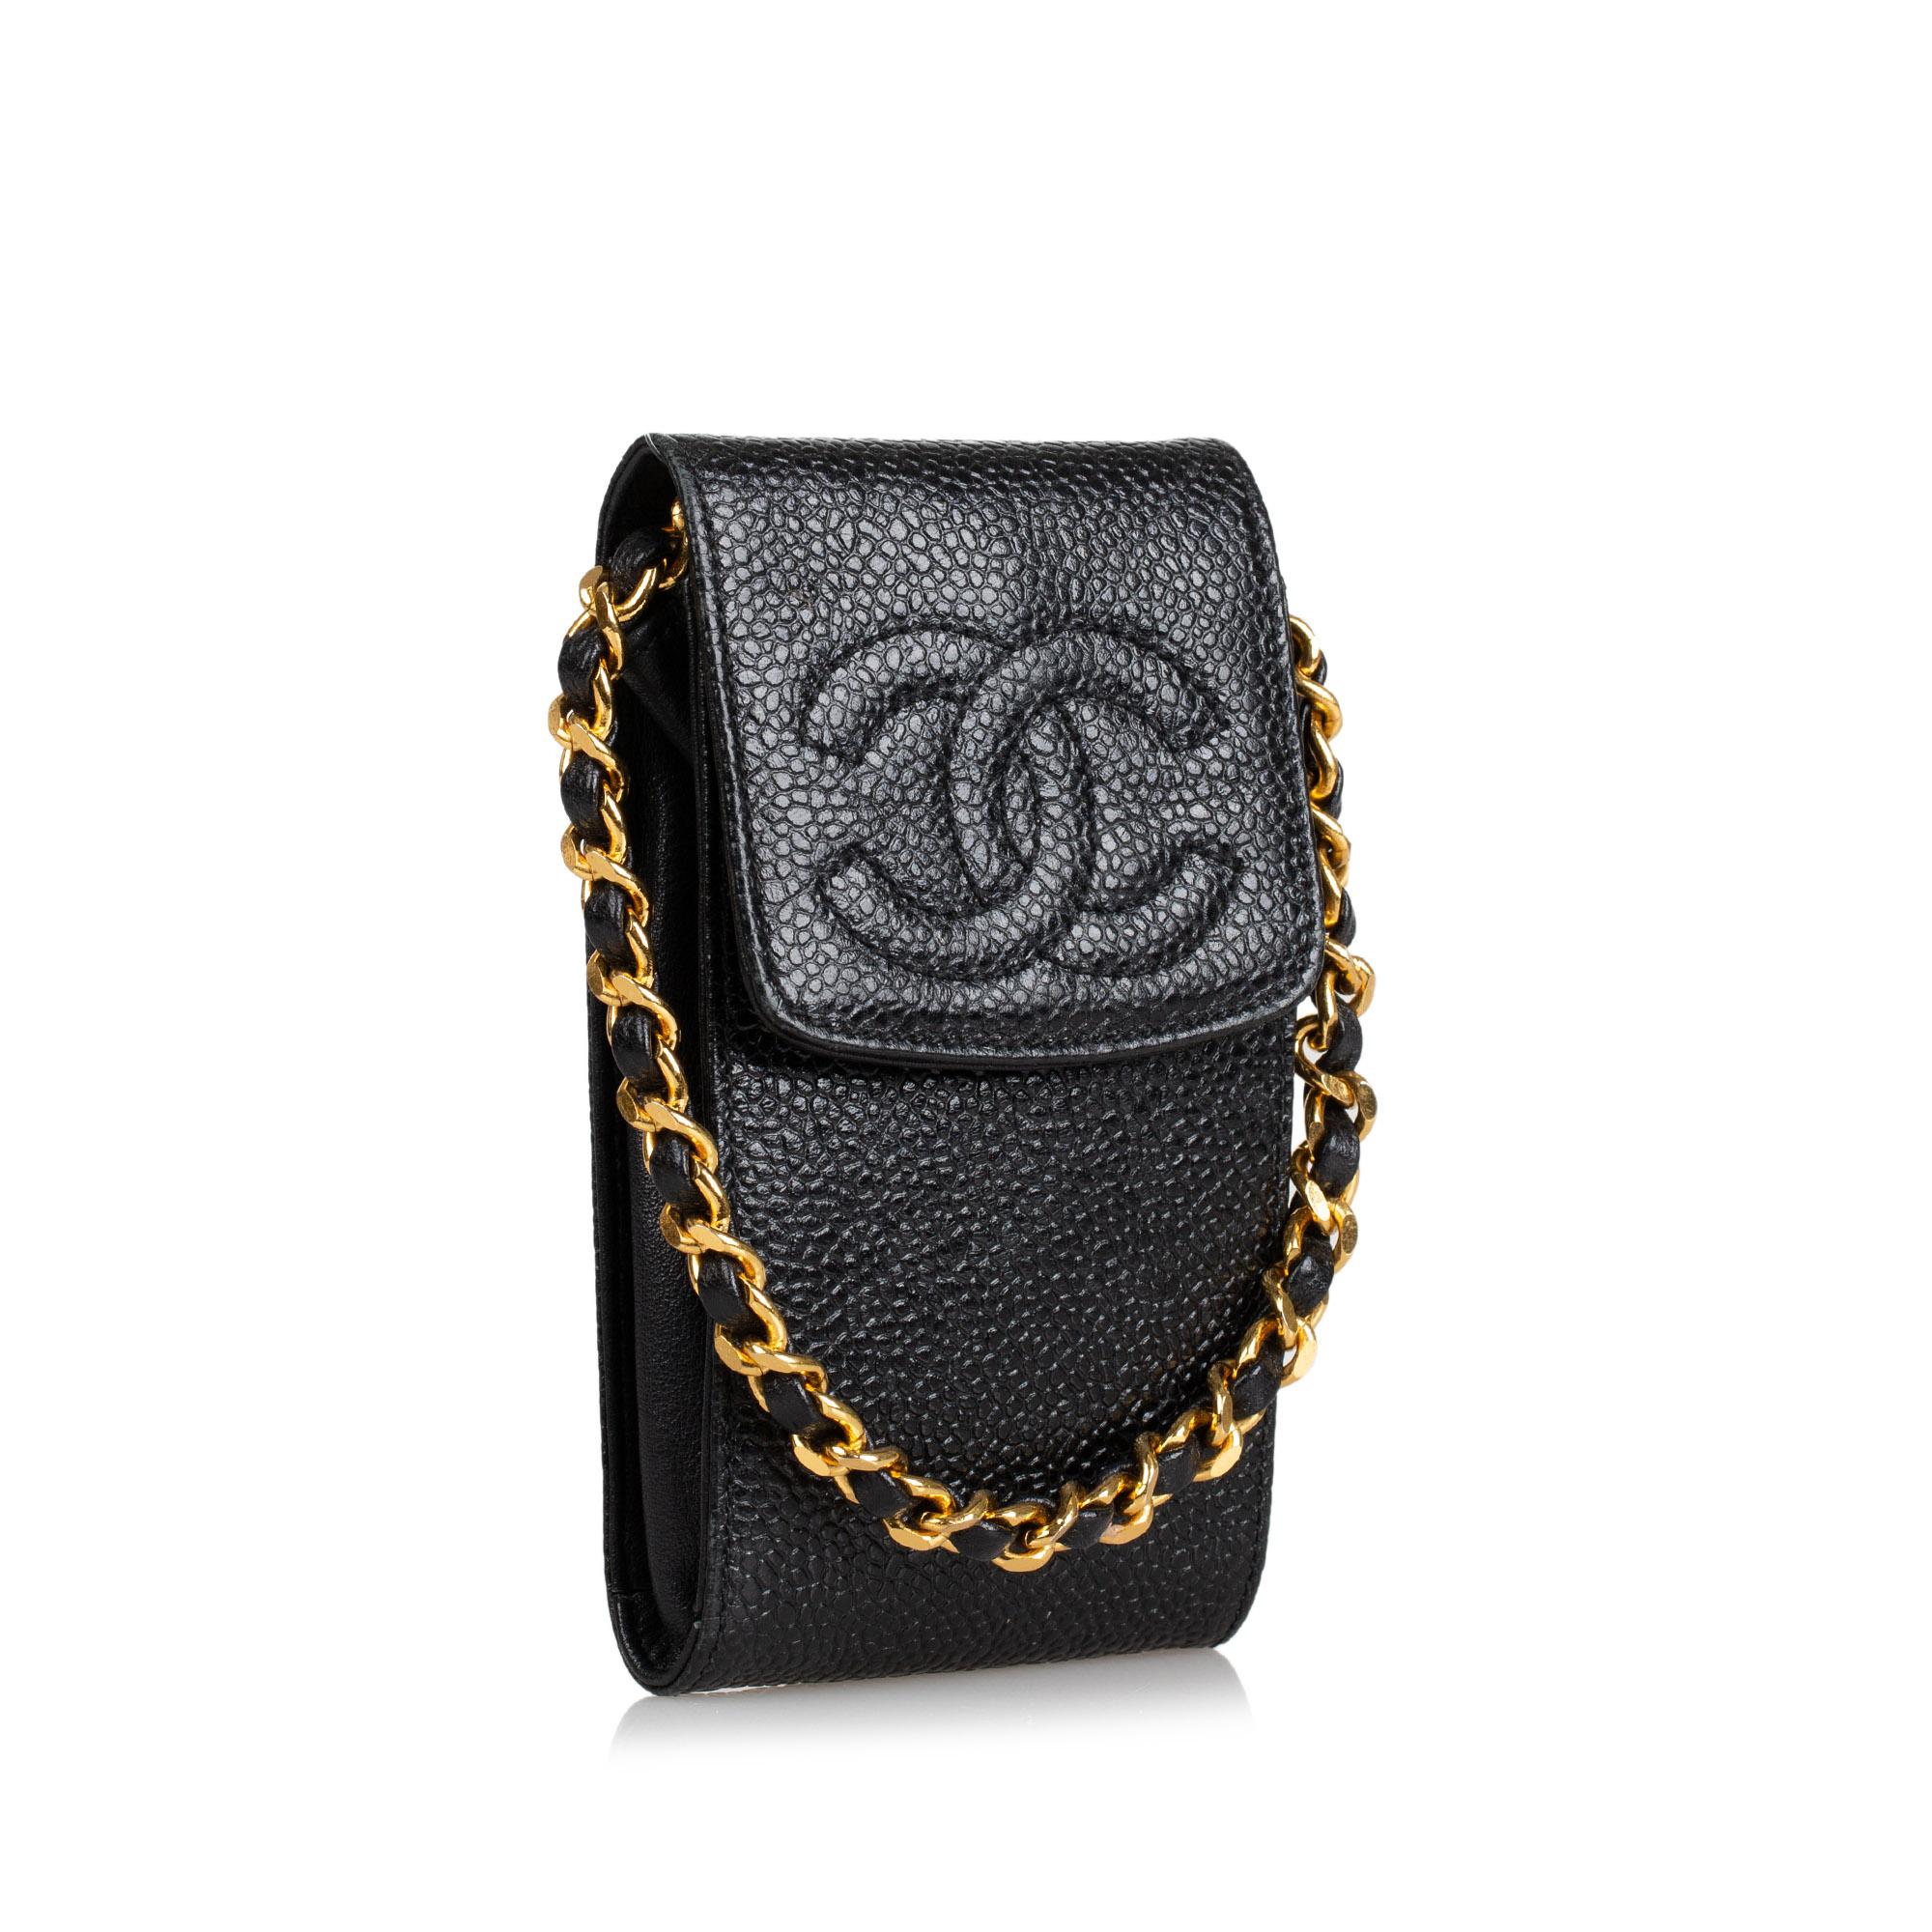 Chanel Caviar Leather Accessories case.

This case features a caviar leather body, woven chain-link strap, gold-tone chain and ring, and a top flap with snap button closure.

Please note, these items are pre-owned and may show signs of being stored